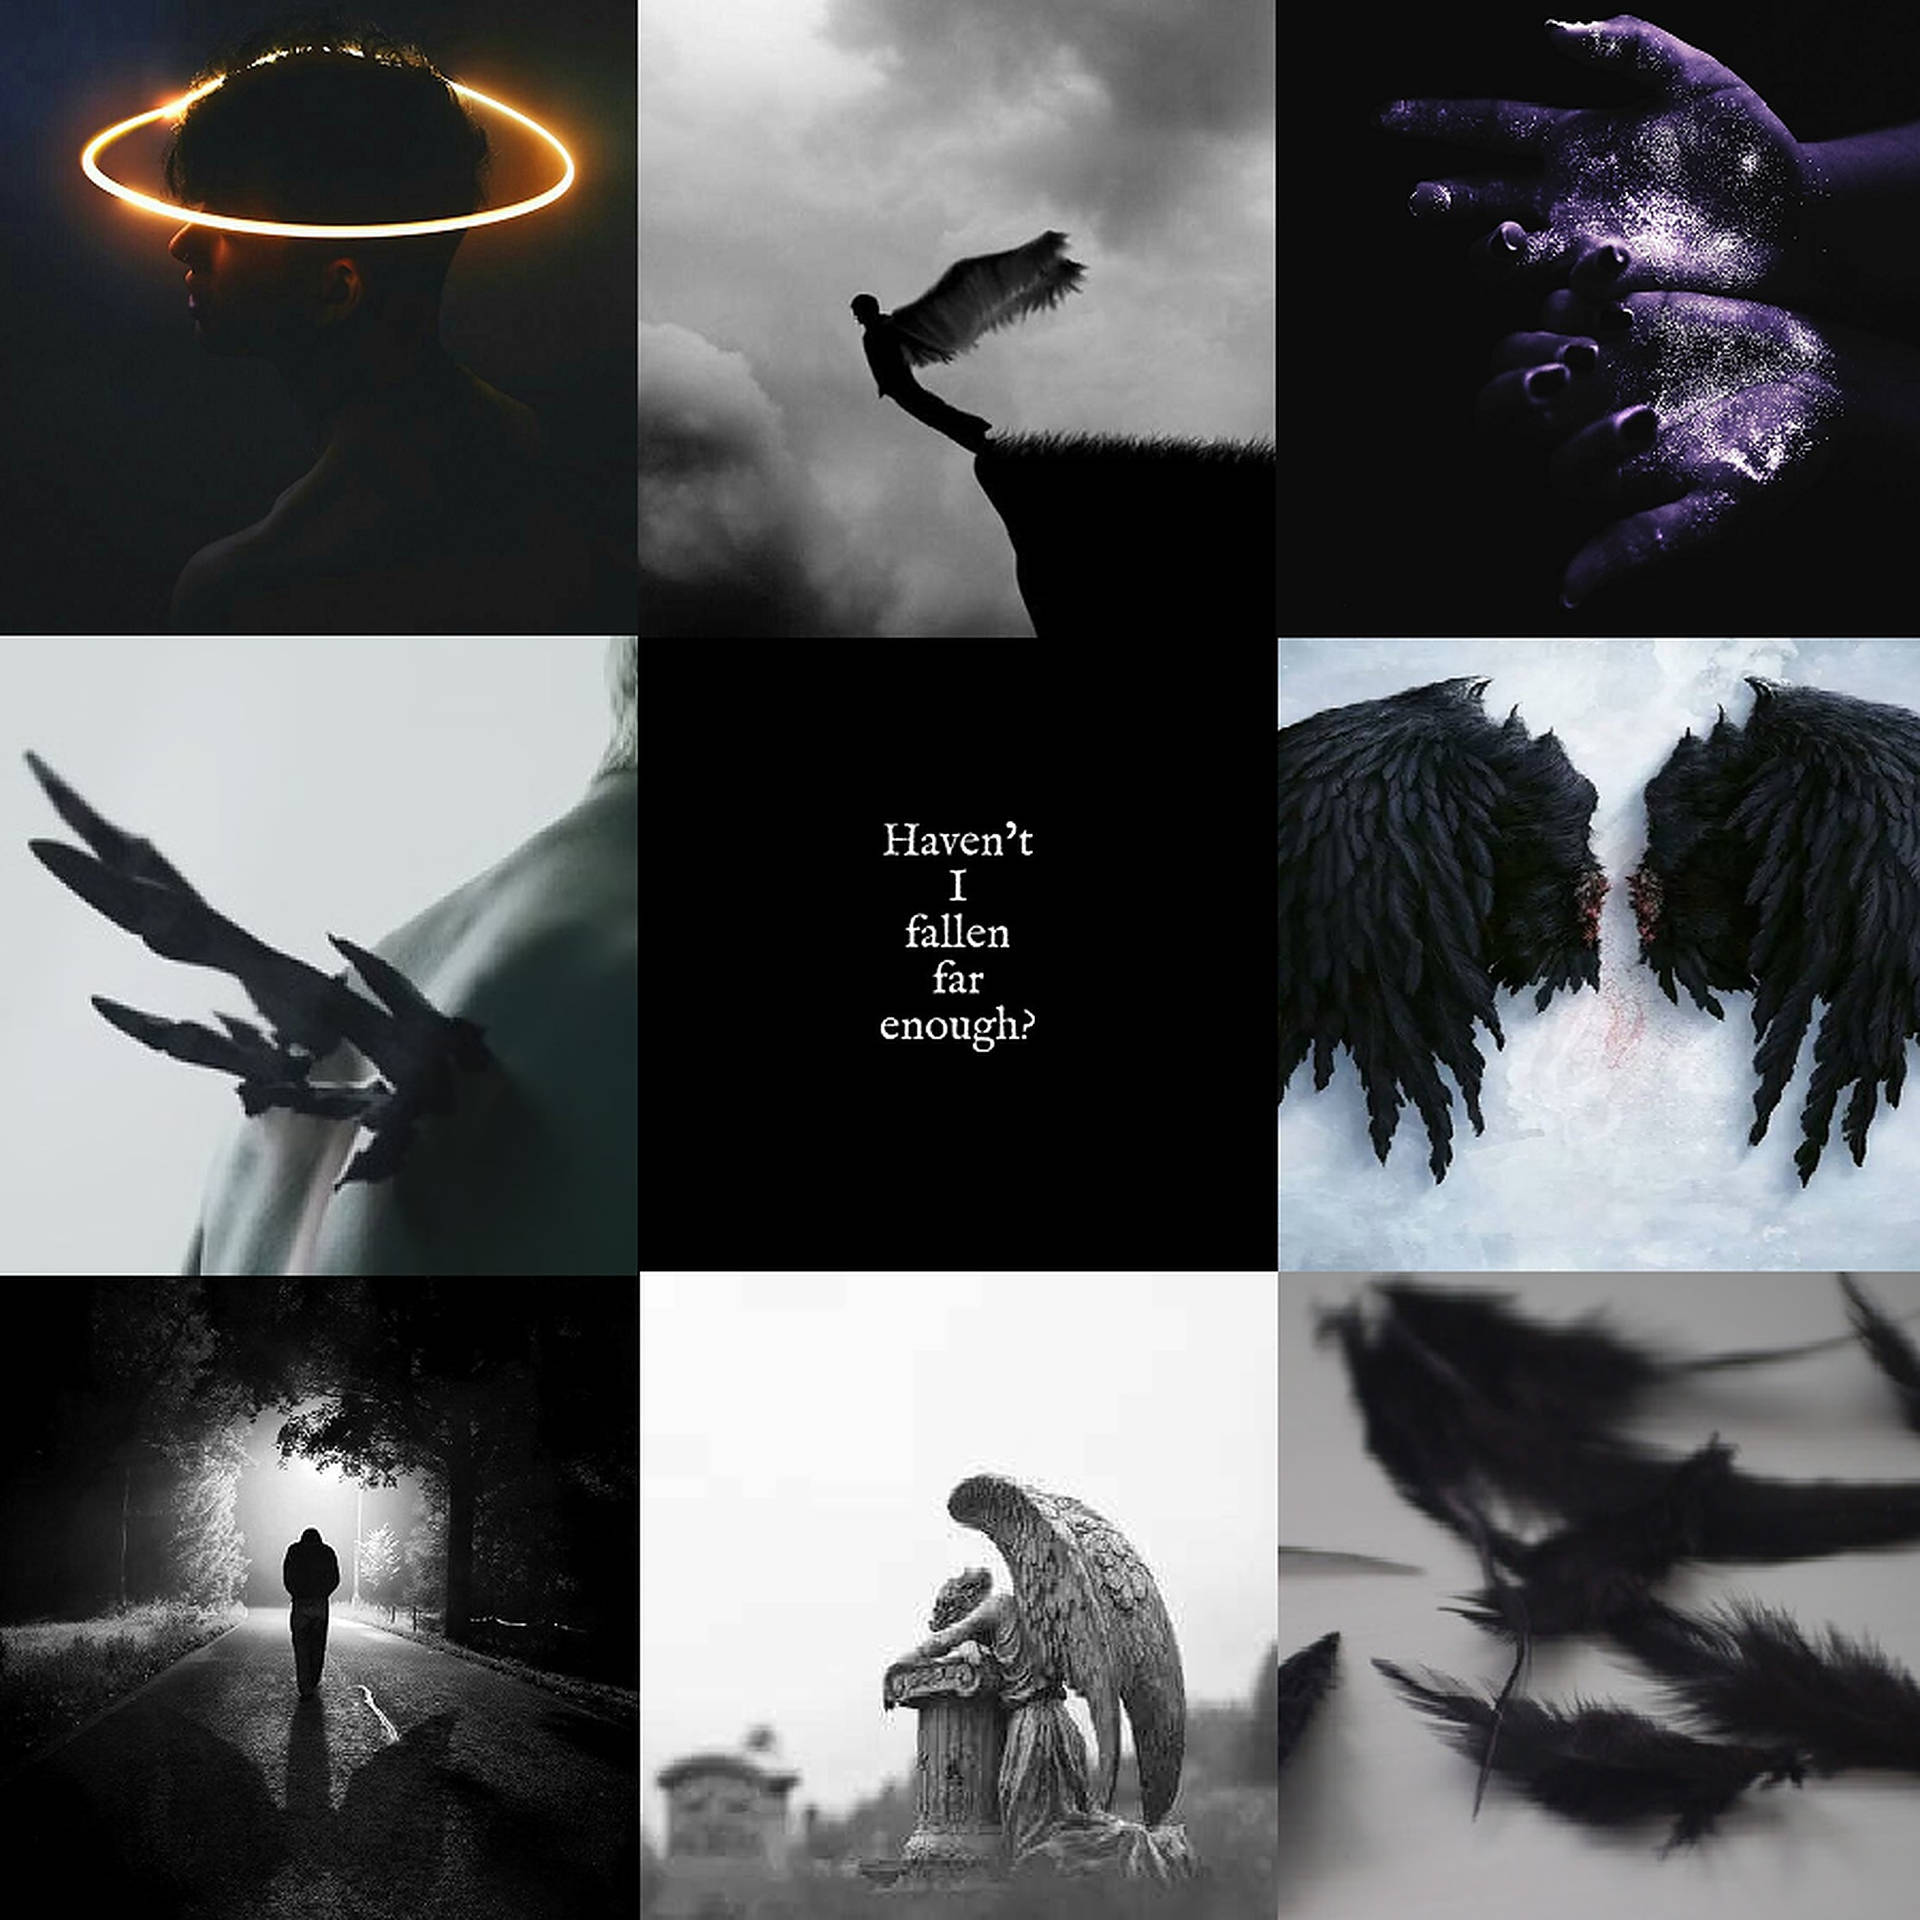 Dark Angel Aesthetic Collage Showcasing A Blend Of Art And Mystery